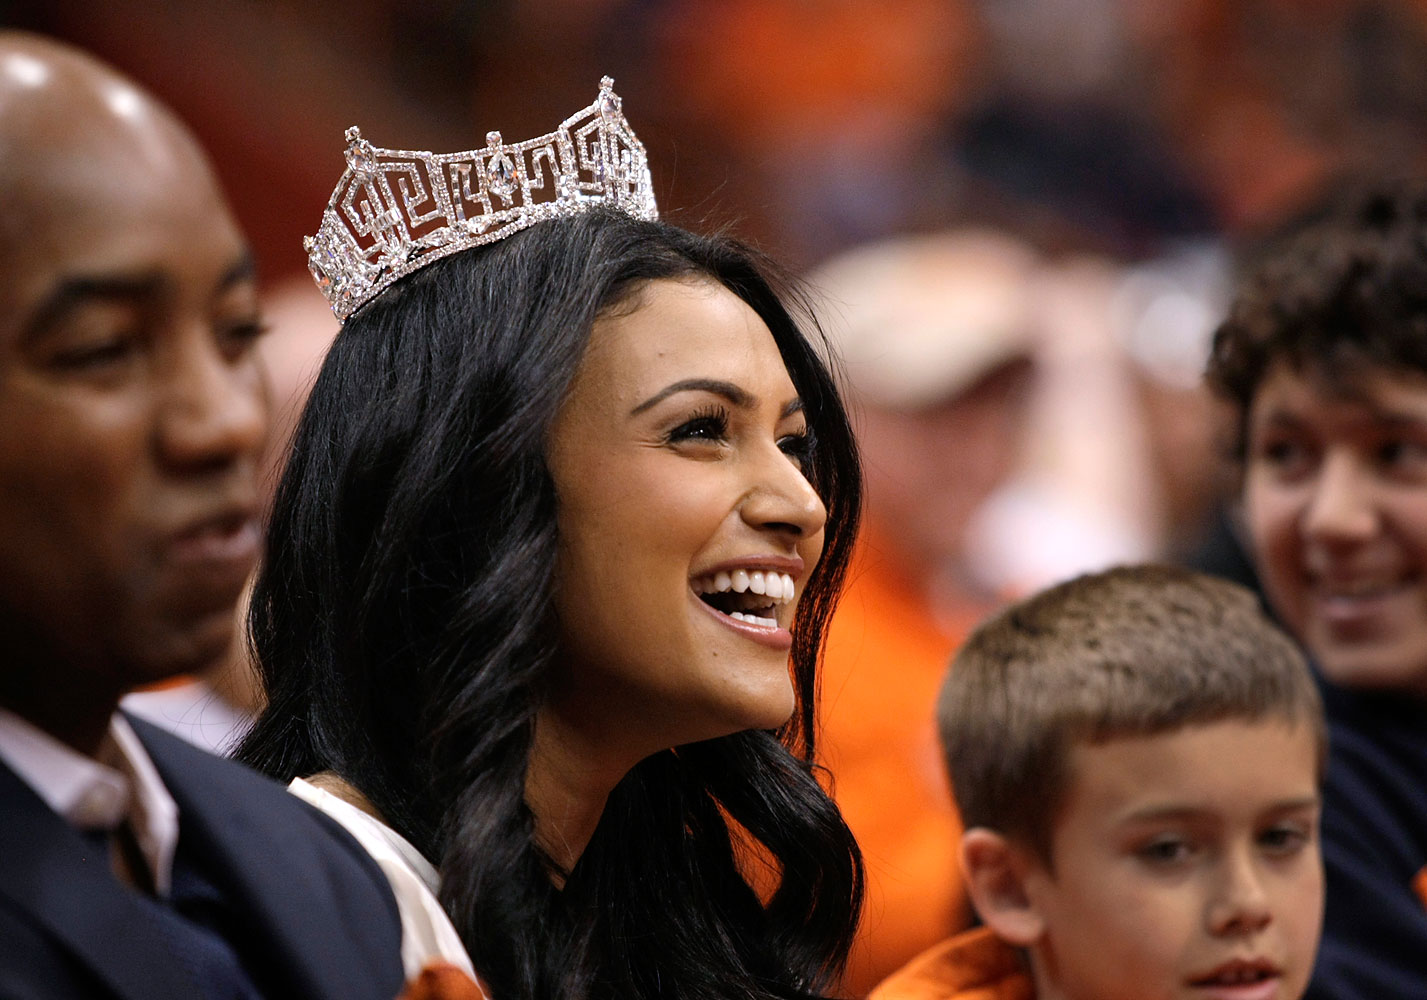 Miss America 2014 Nina Davuluri at a NCAA college basketball game in Syracuse, N.Y., Feb. 15, 2014. A Pennsylvania high school student was suspended for asking Davuluri to prom during a question and answer session at school. (Nick Lisi—AP)